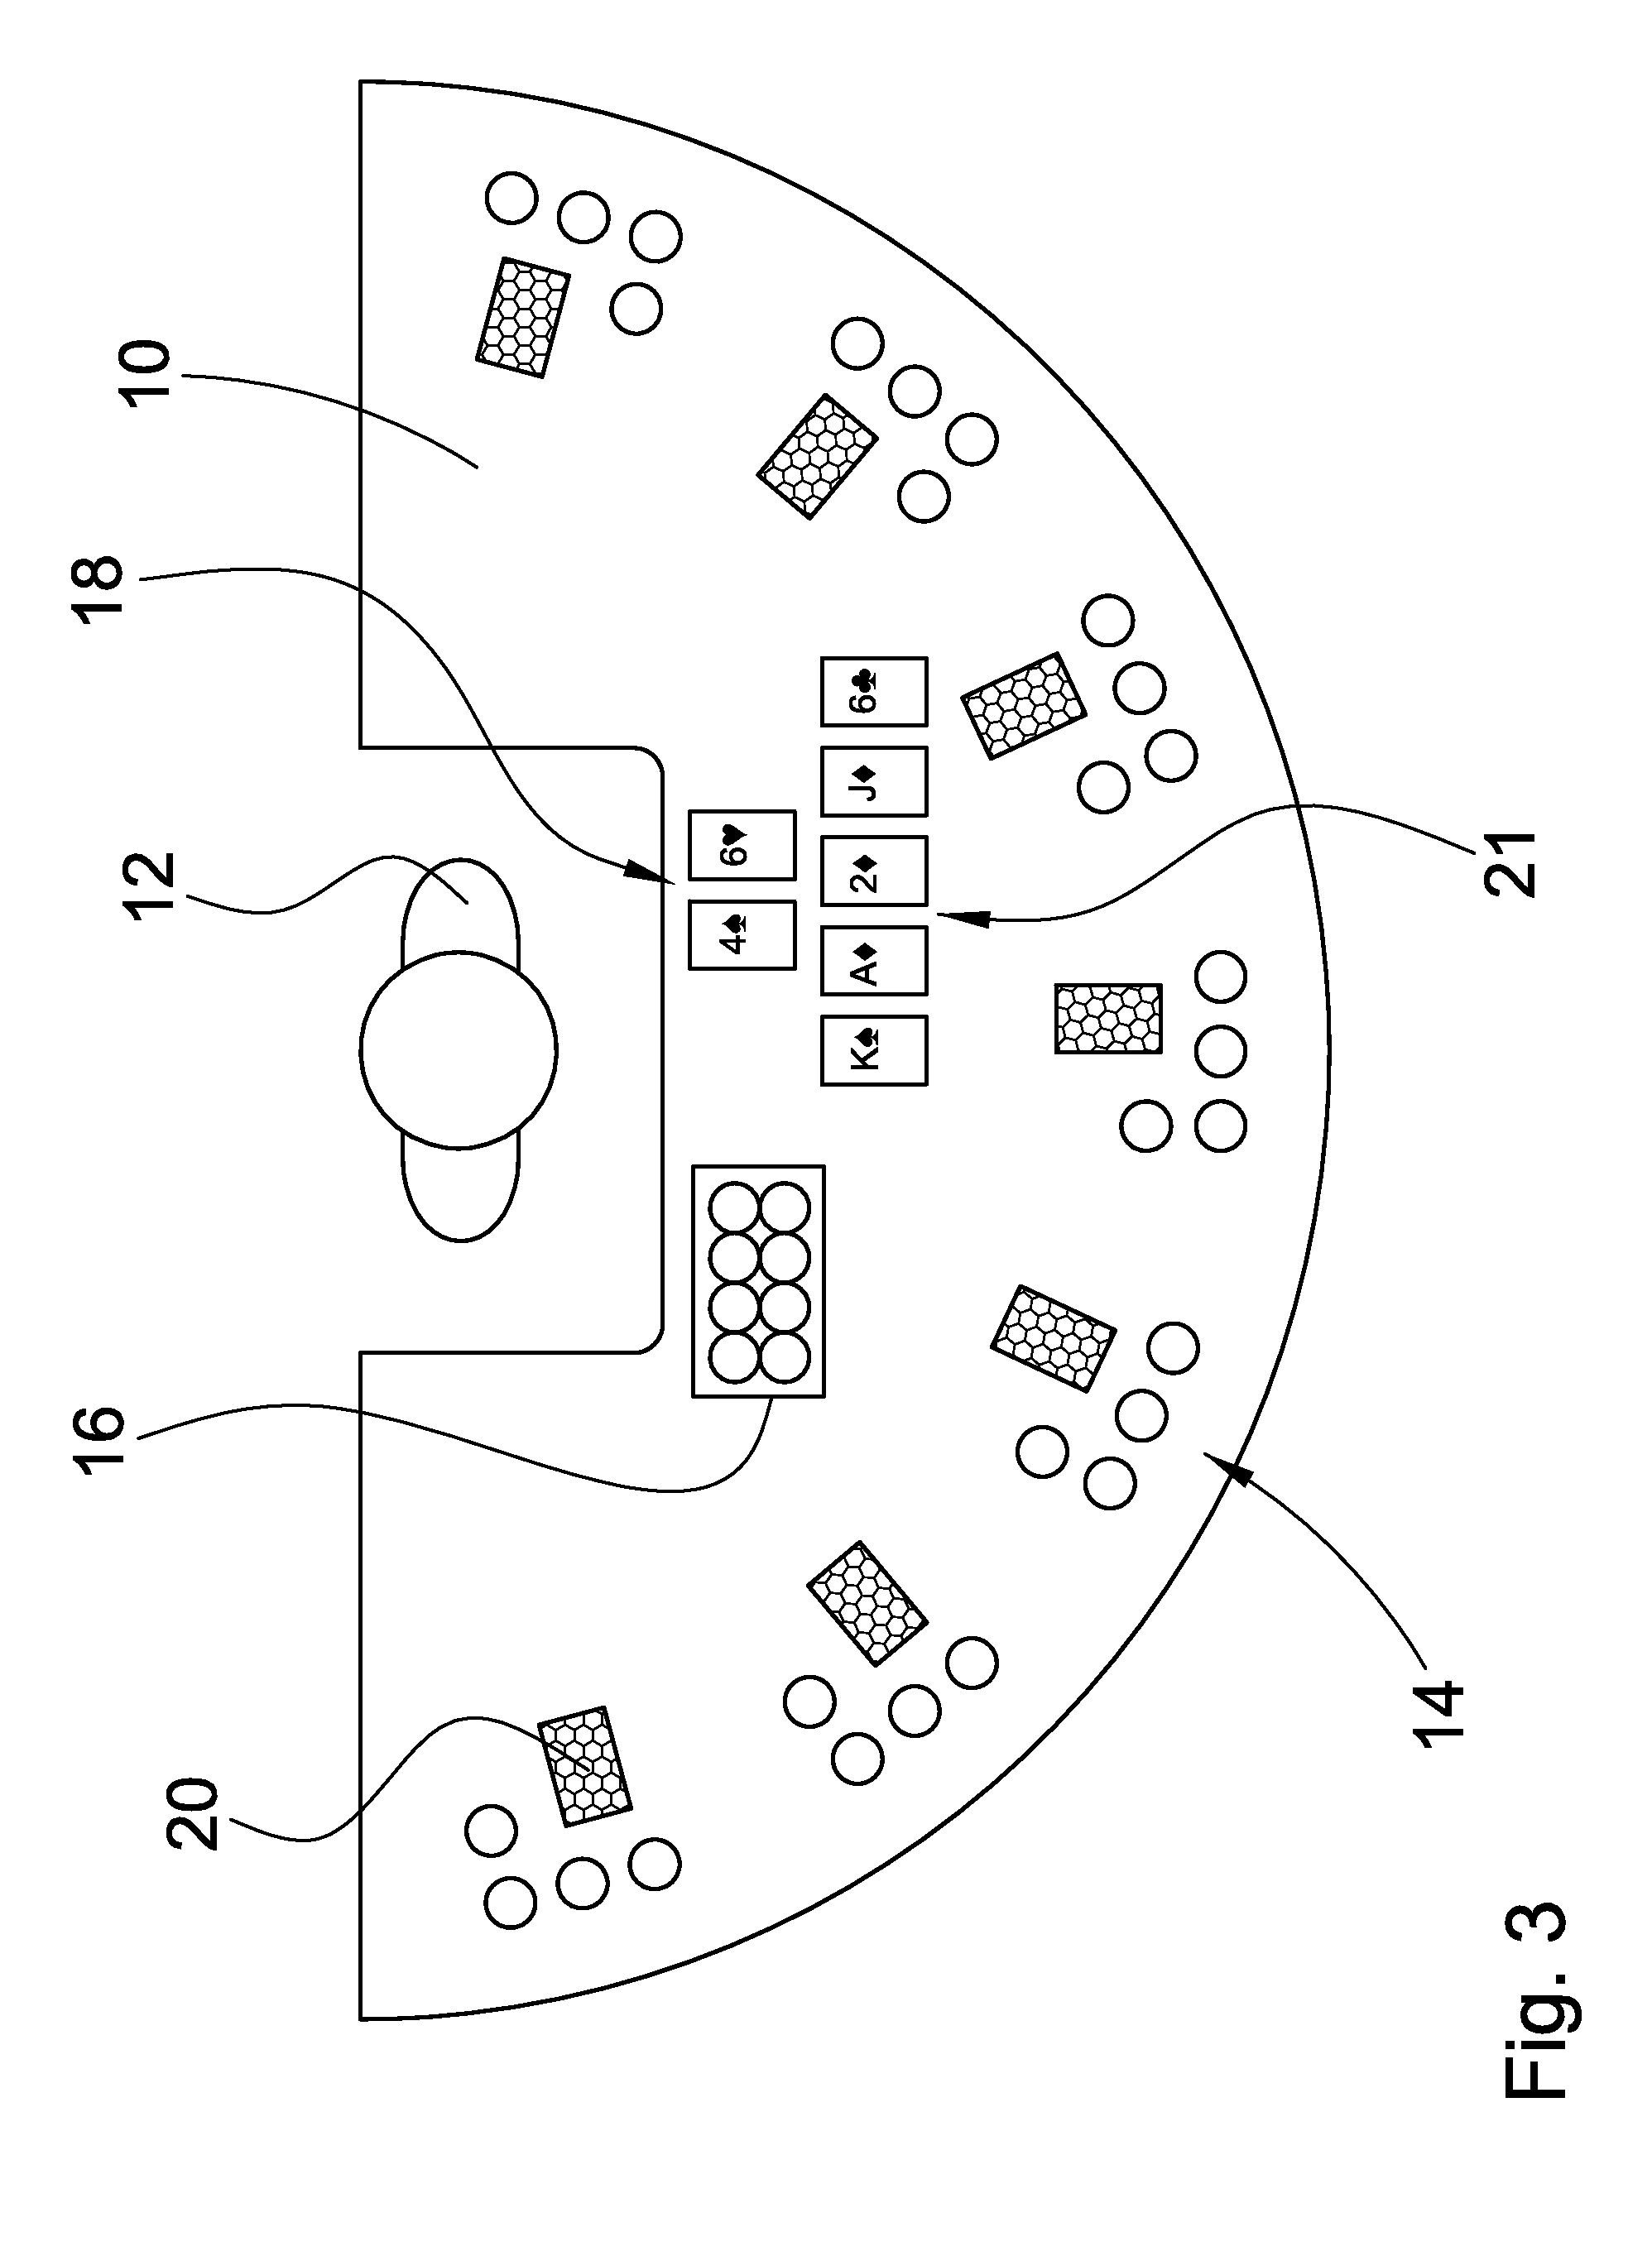 Card game method and apparatus for playing the same